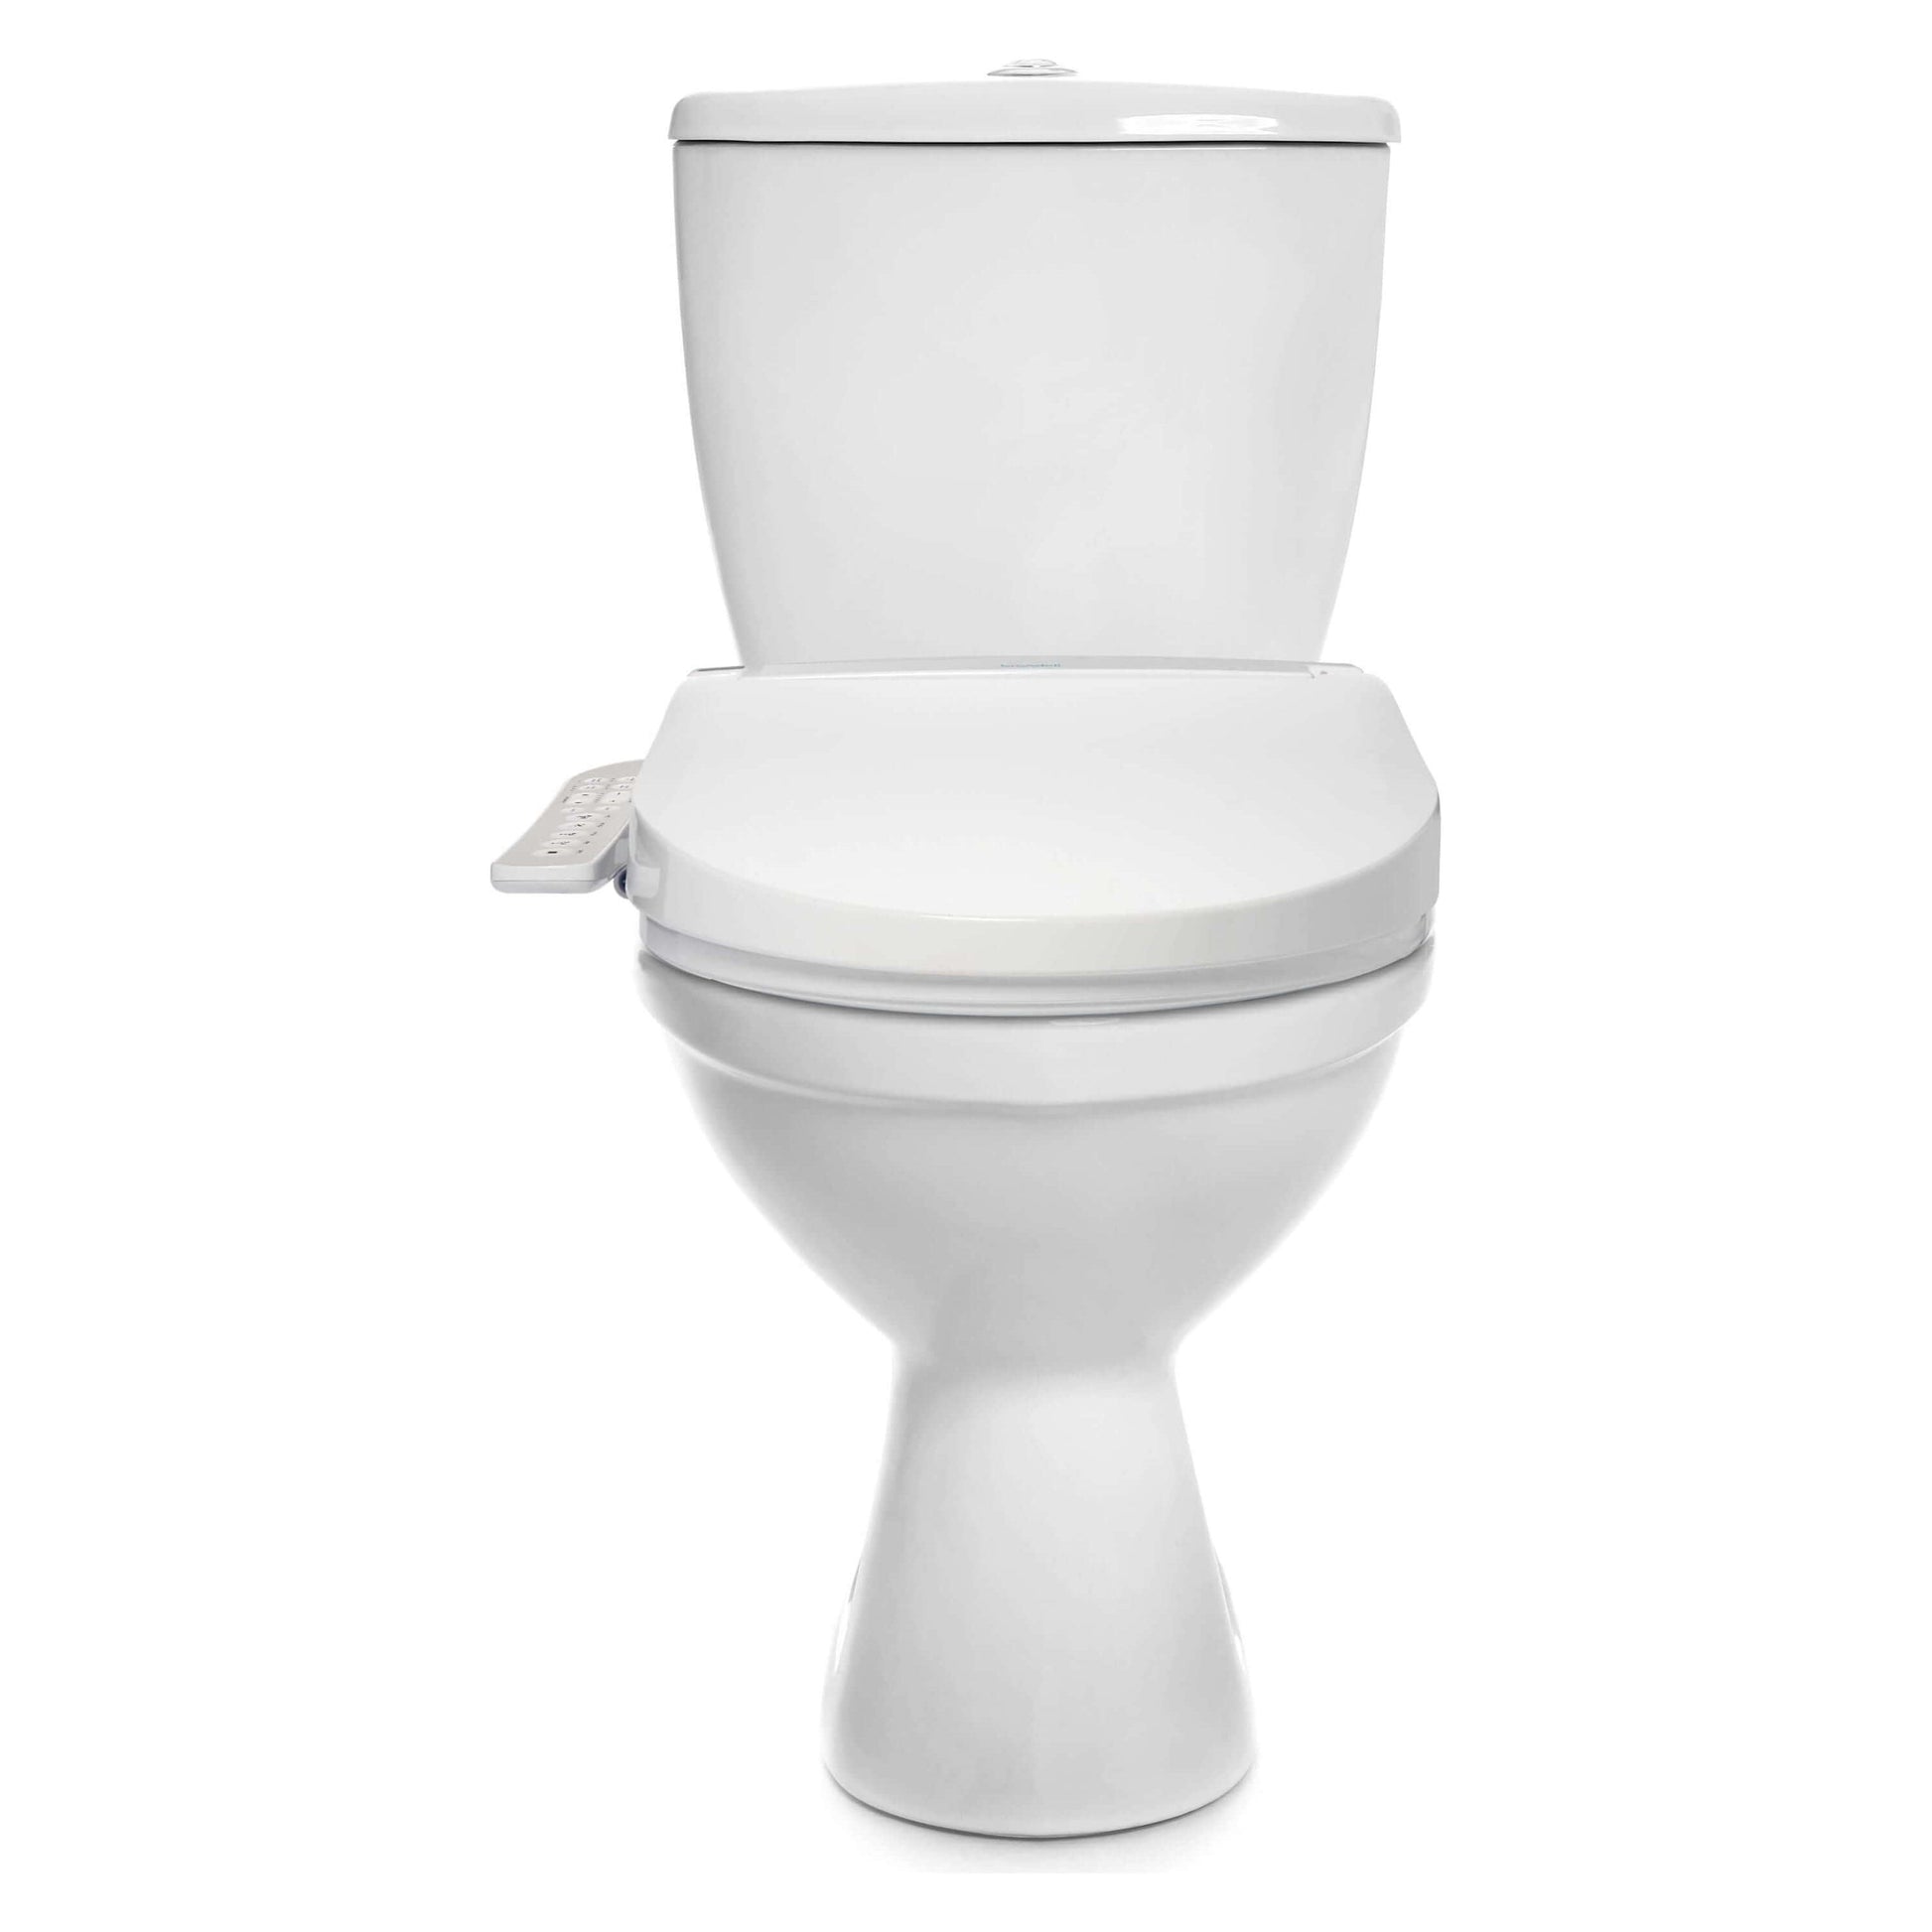 Swash Select DR801 Bidet Seat - front view attached to a toilet